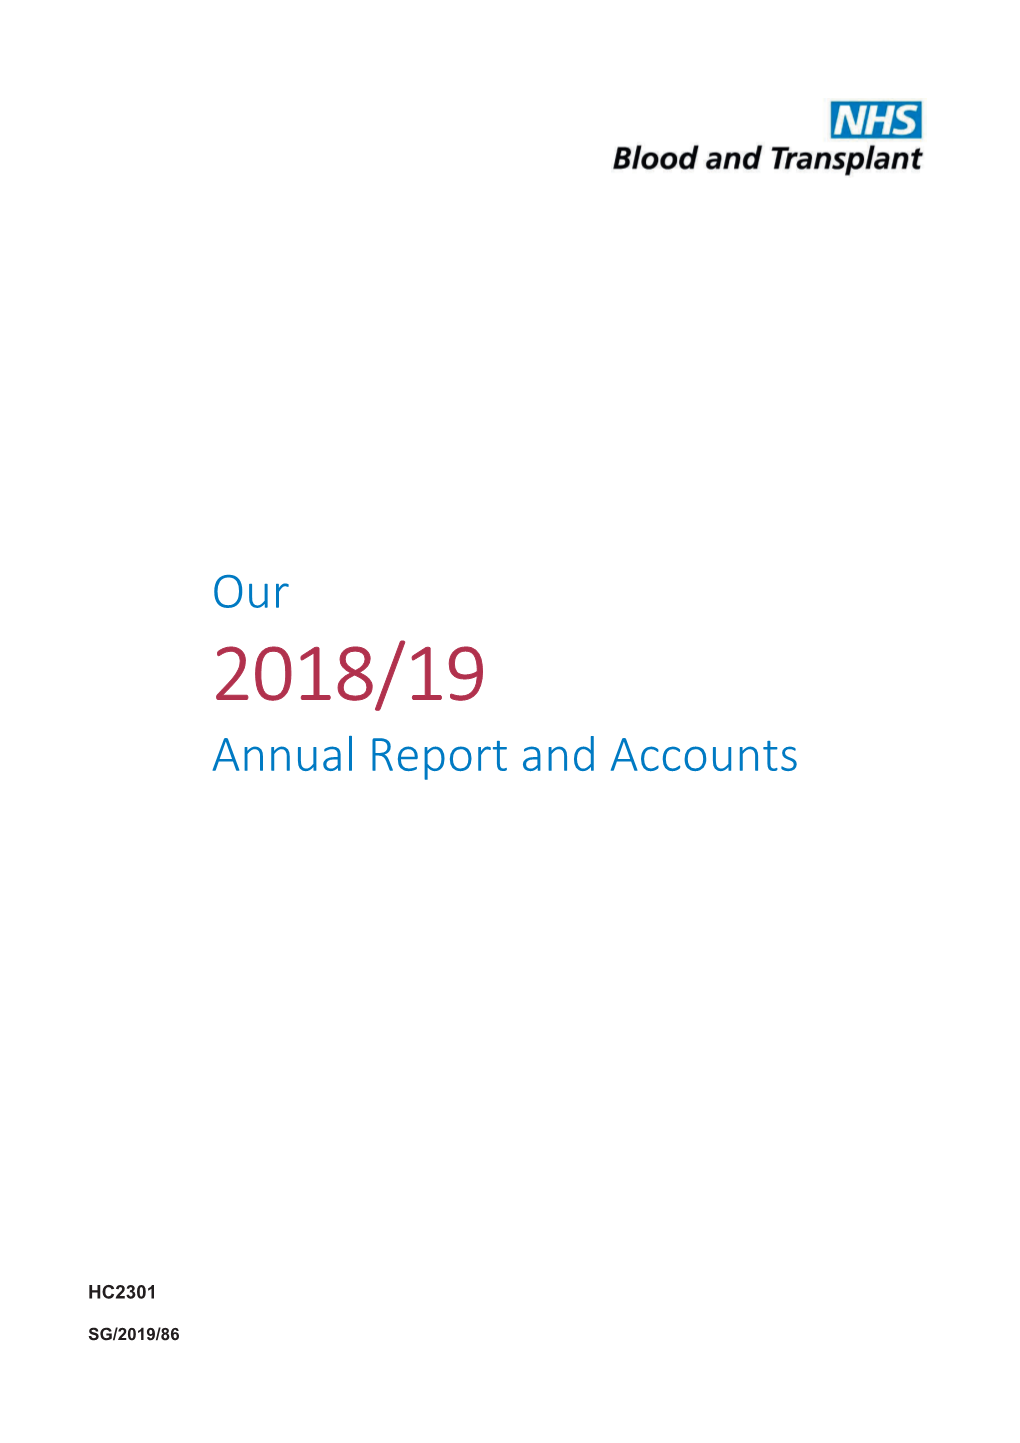 2019/19 Annual Report and Accounts